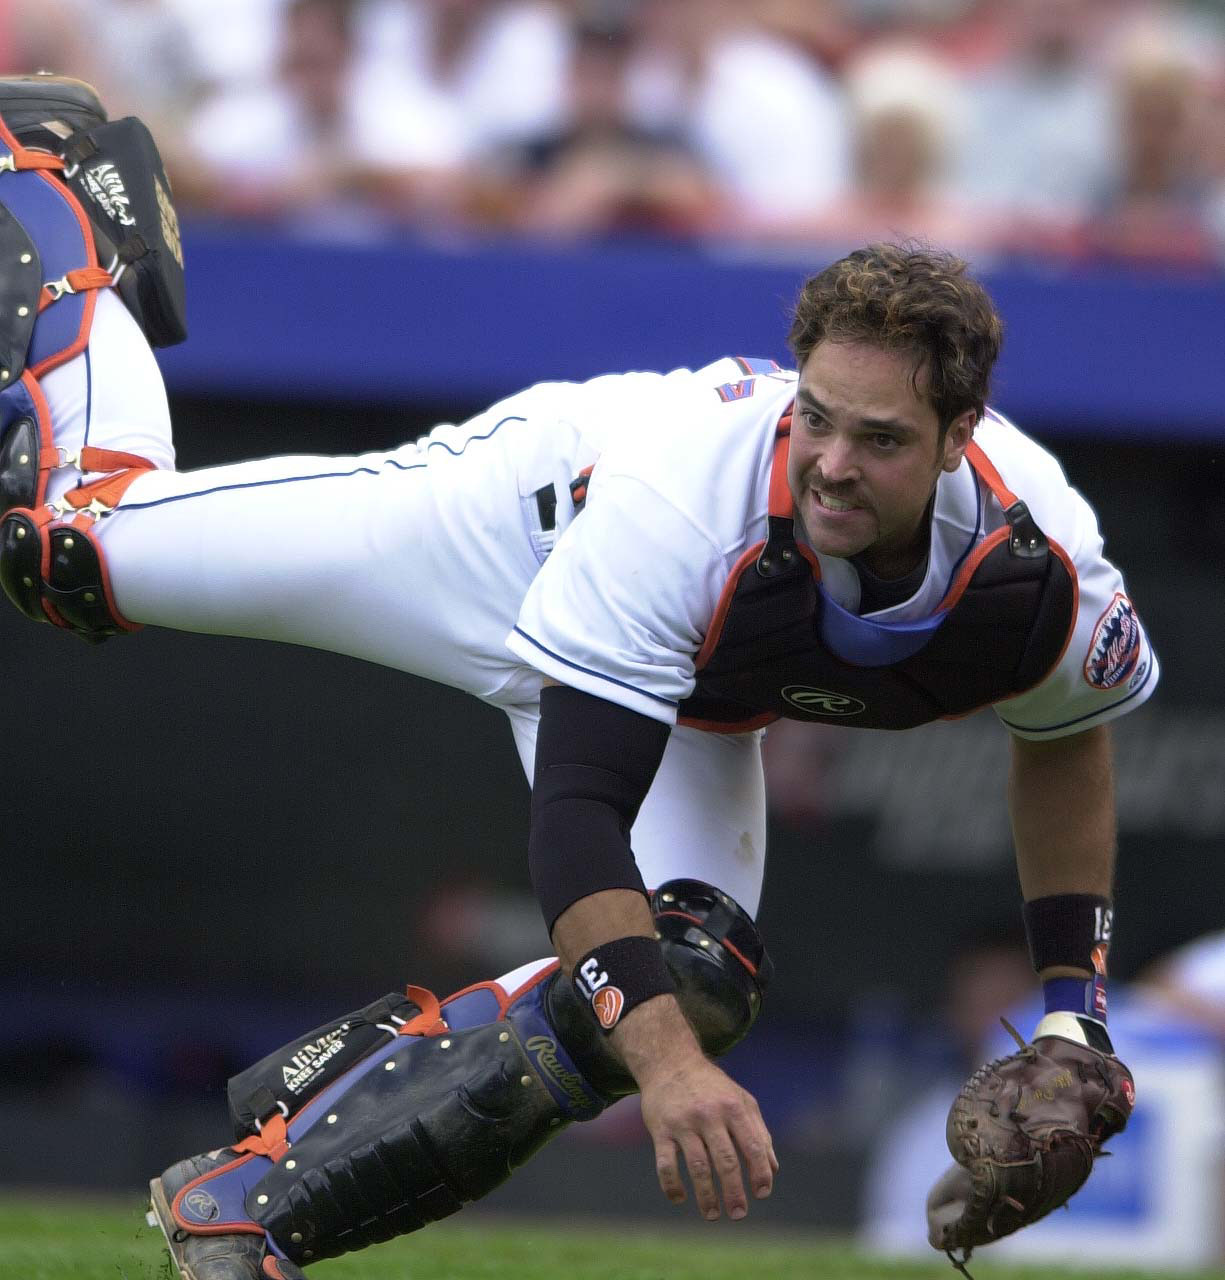 Action Shot of Mike Piazza Playing Defense